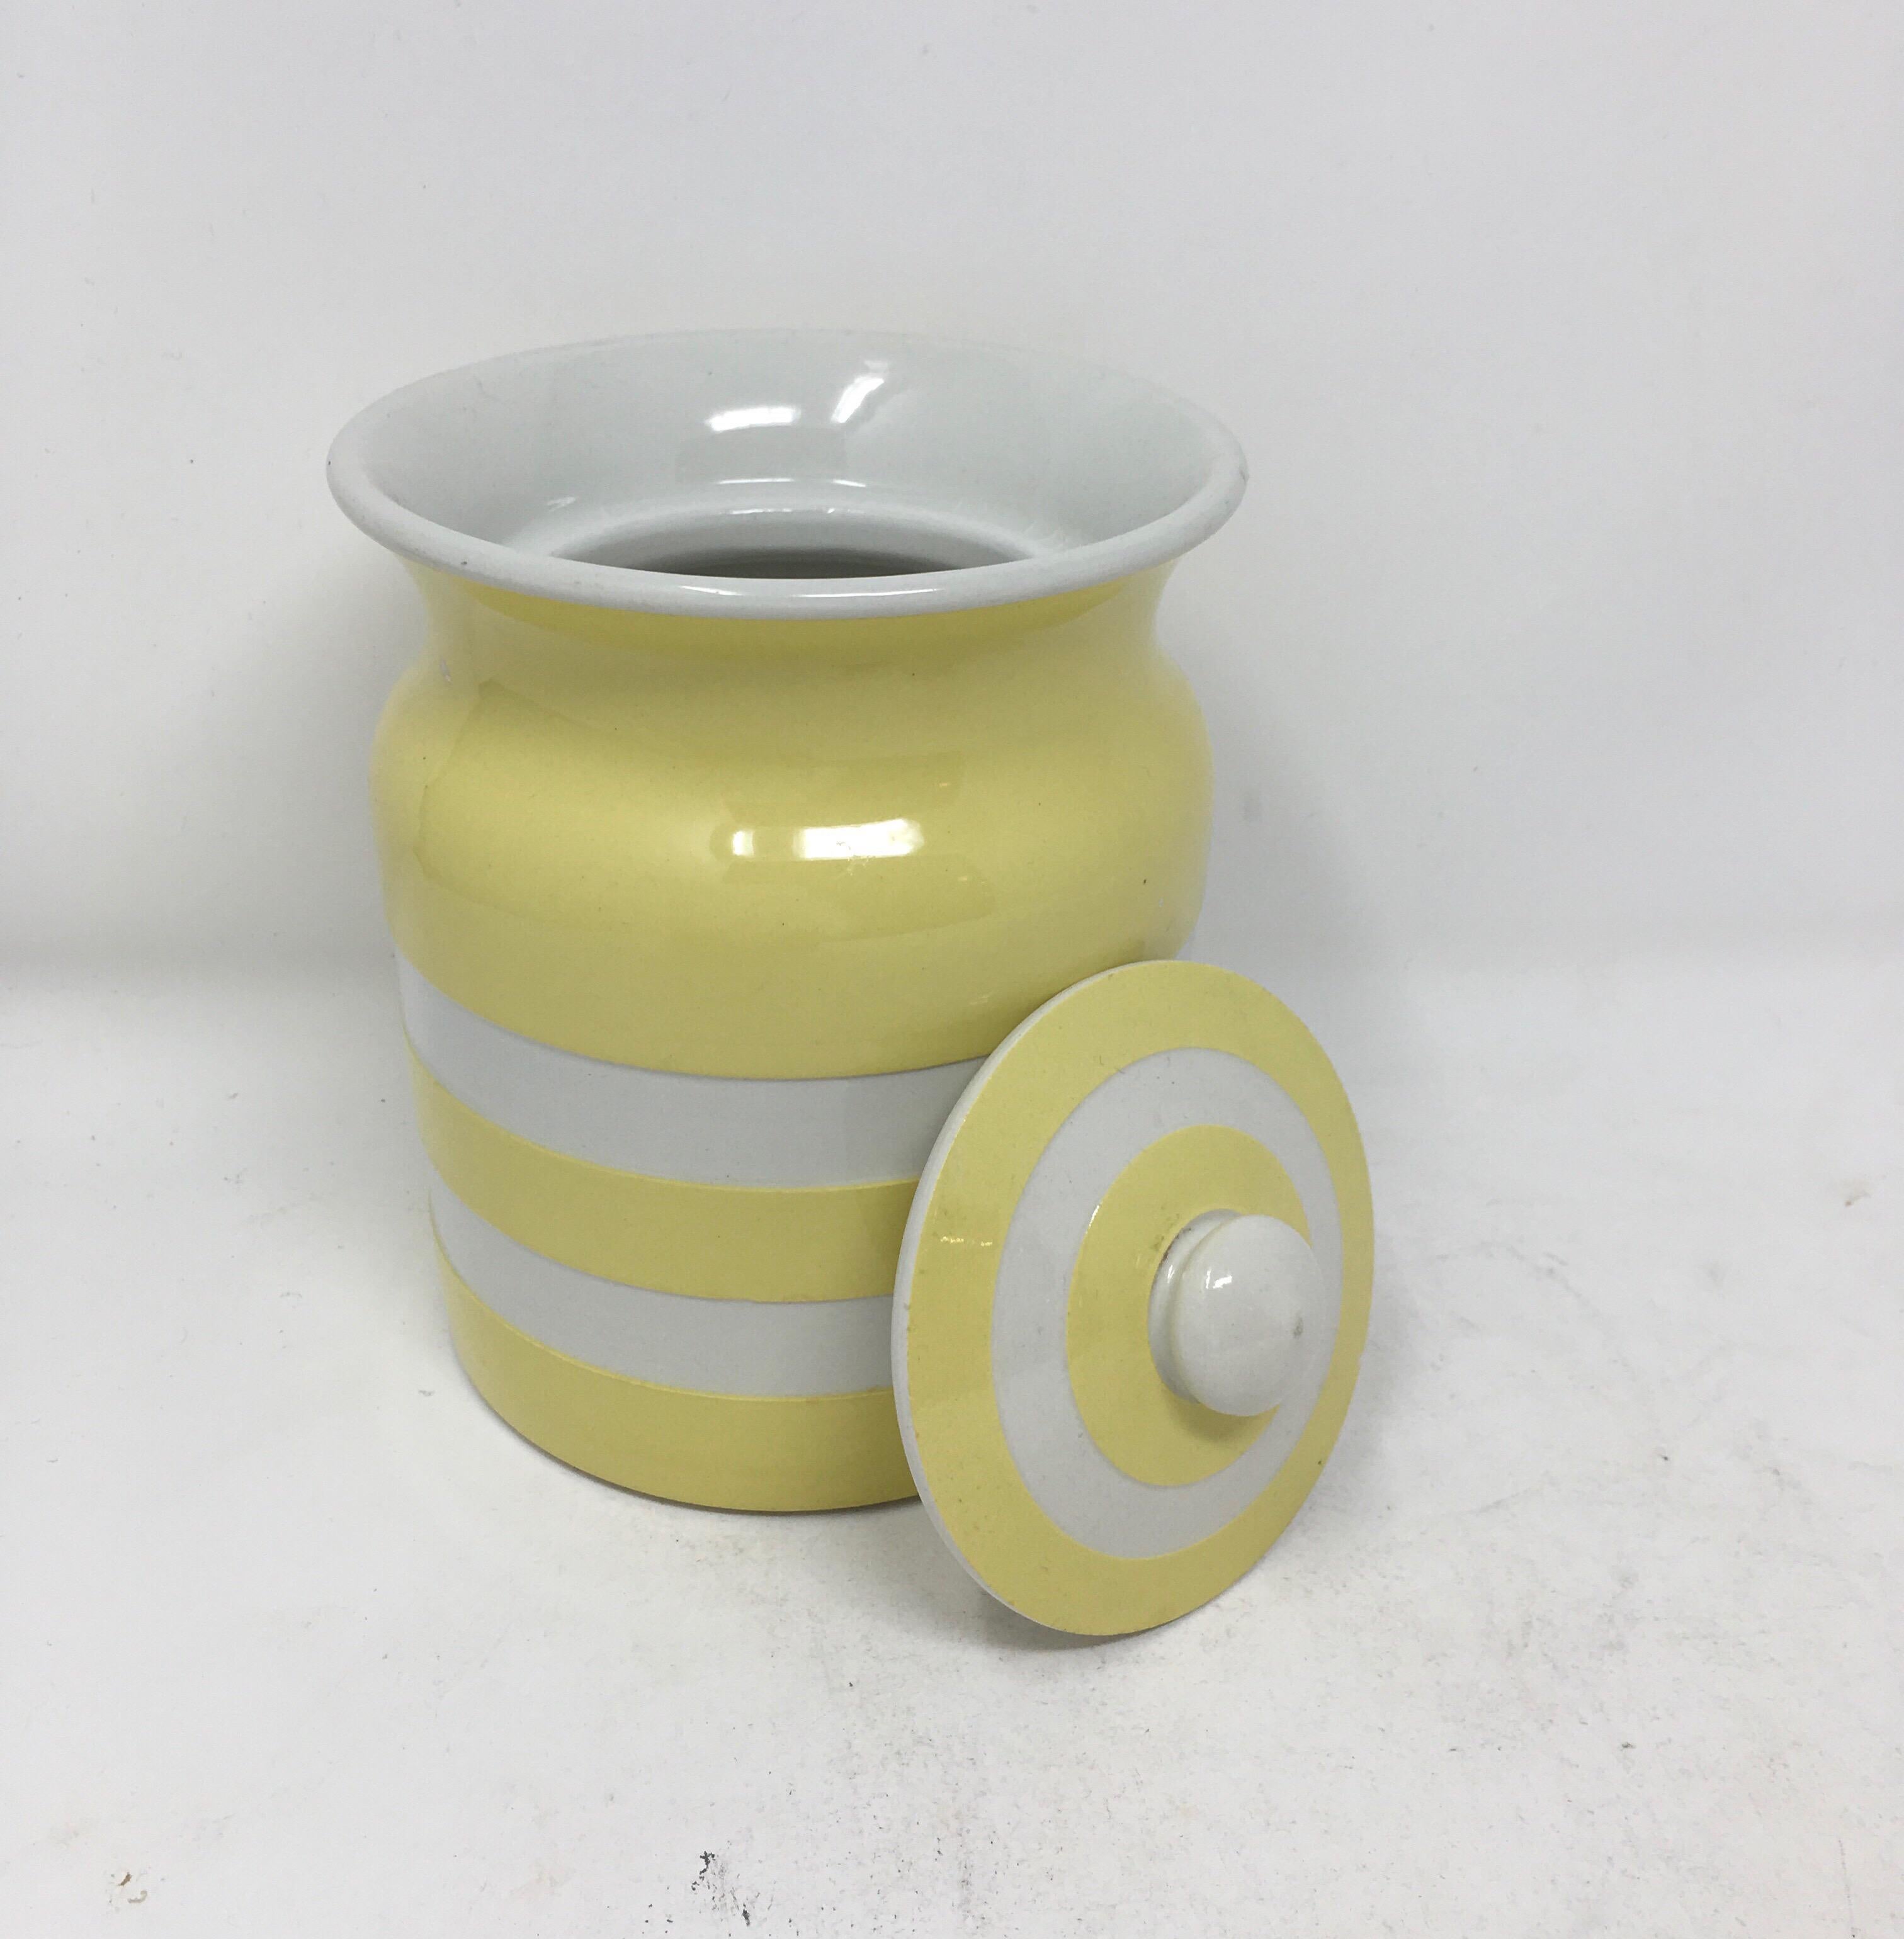 Found in England, this small size Cornish Kitchen Ware ceramic storage cannister with lid is from makers TG Green, and is in the much rarer yellow color (most often you see these in blue). Made between the 1930s-1950s, this original vintage jar with